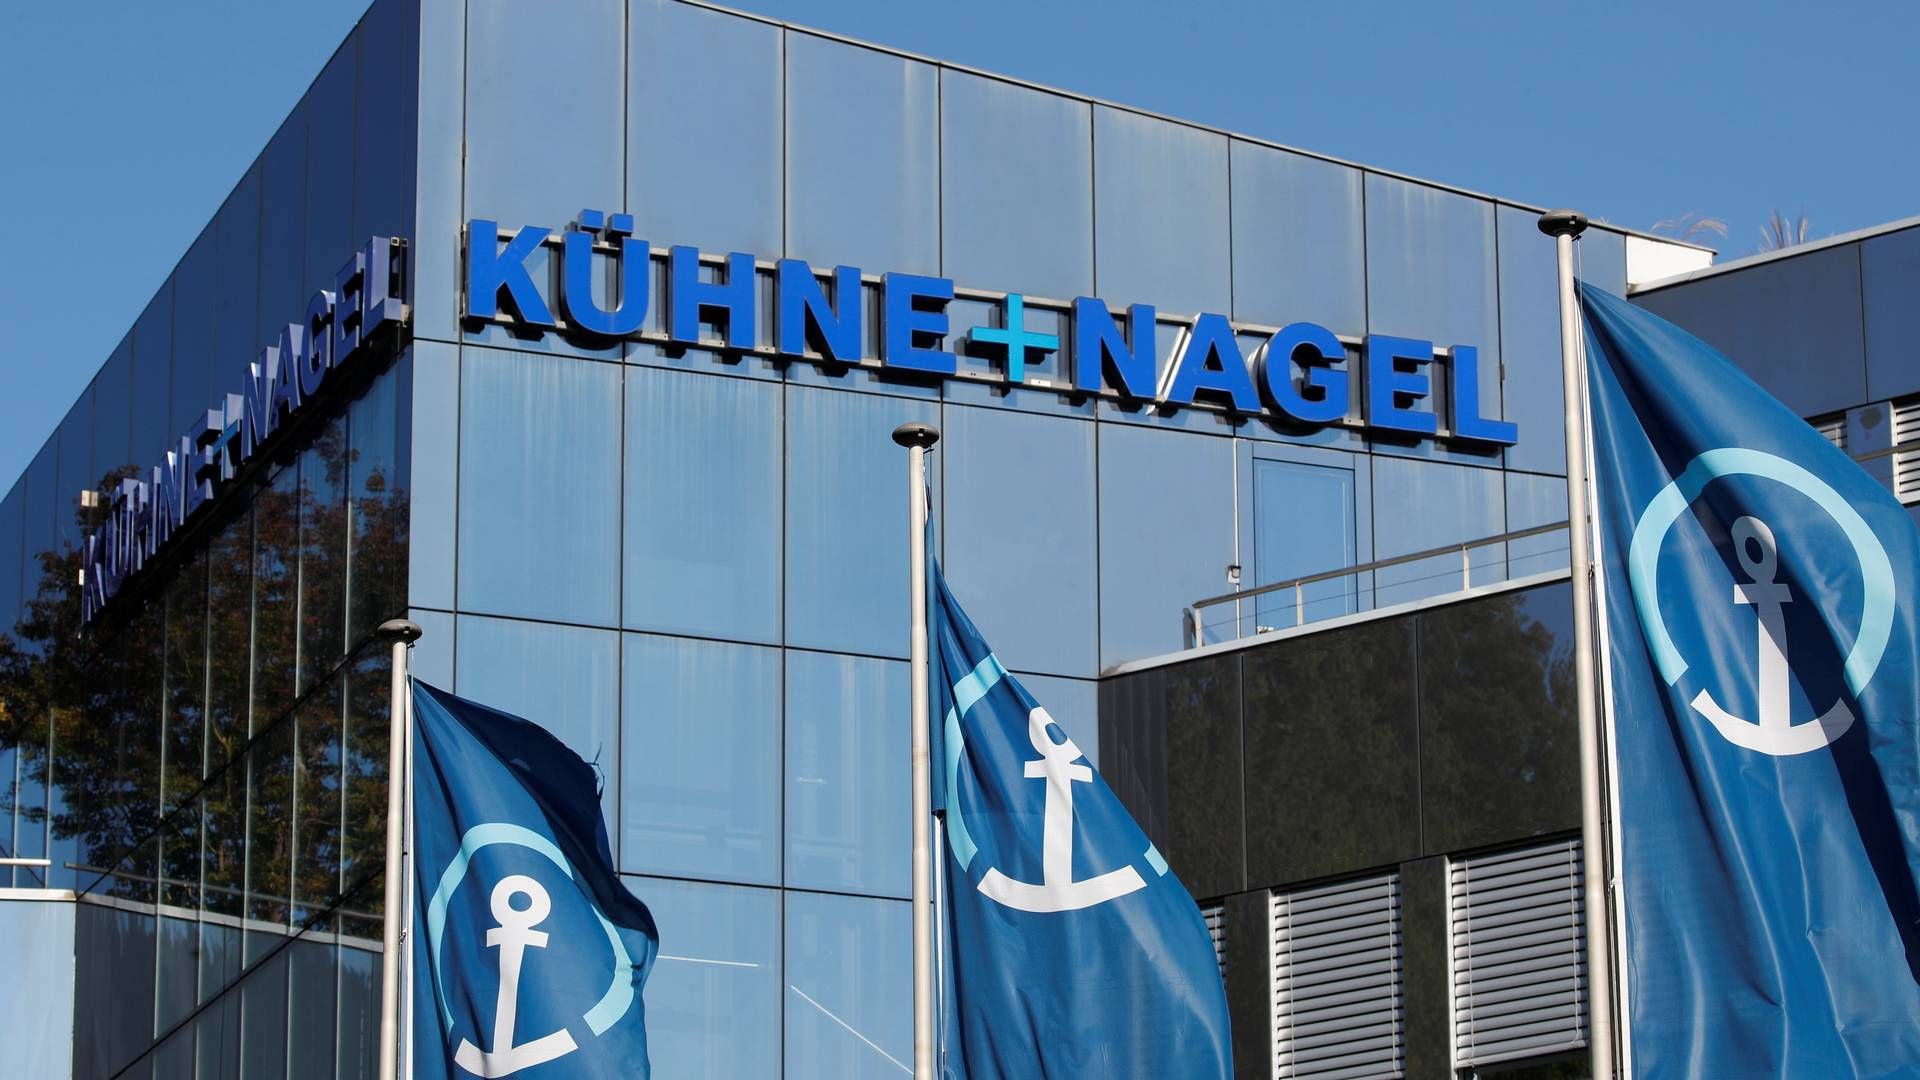 Kuehne+Nagel has approximately 400,000 customers worldwide and is spread across 100 countries with 1300 locations. | Photo: Arnd Wiegmann/Reuters/Ritzau Scanpix